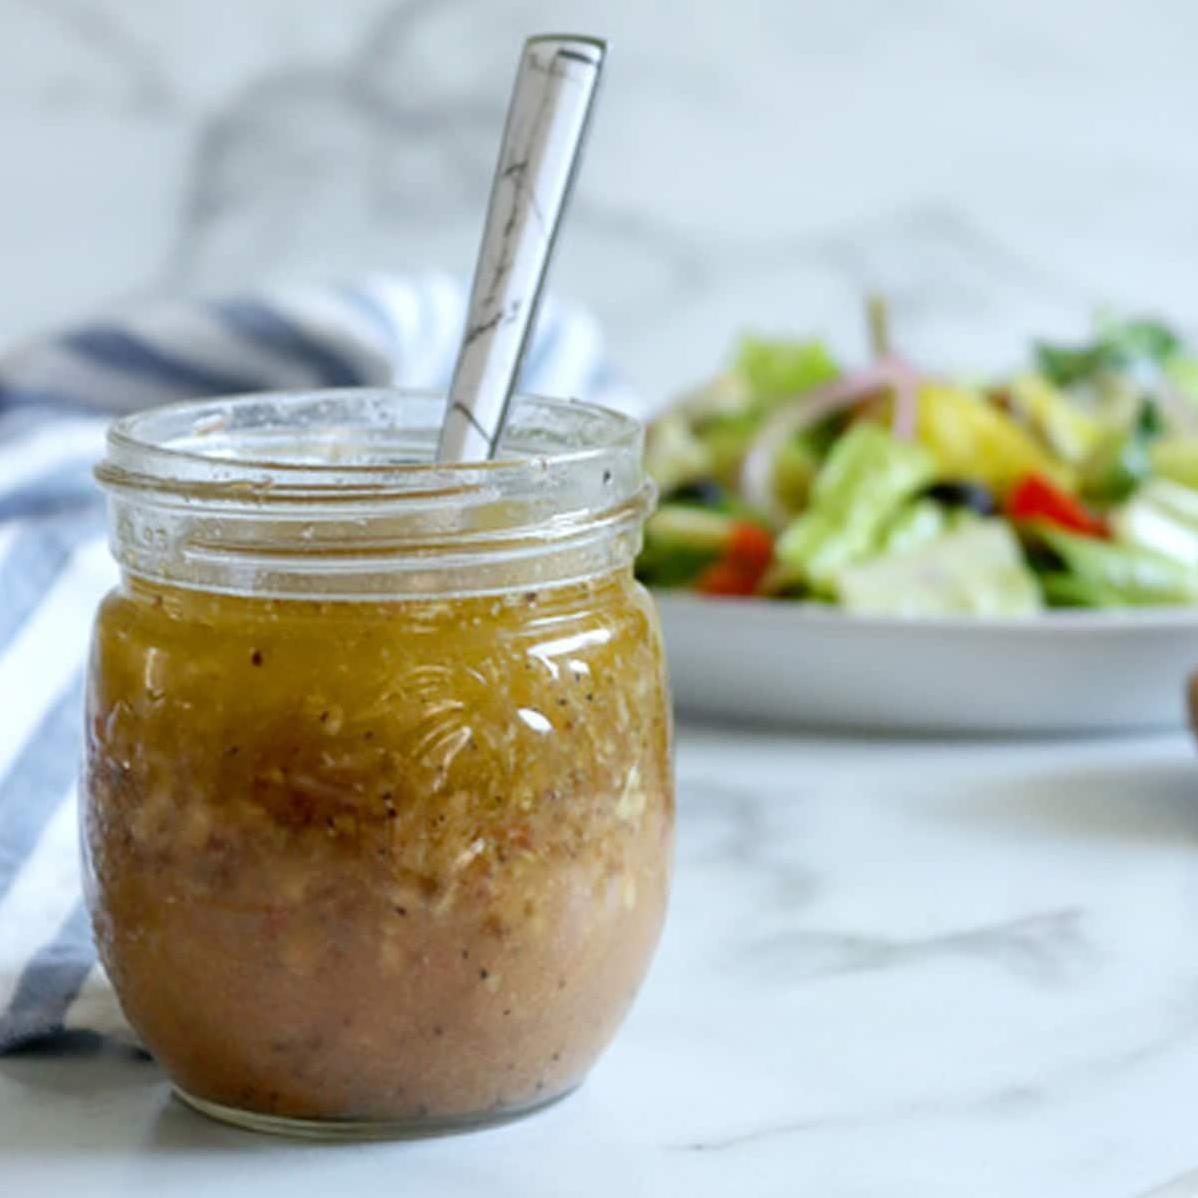  This dairy-free oil and vinegar dressing is perfect for those with dietary restrictions.